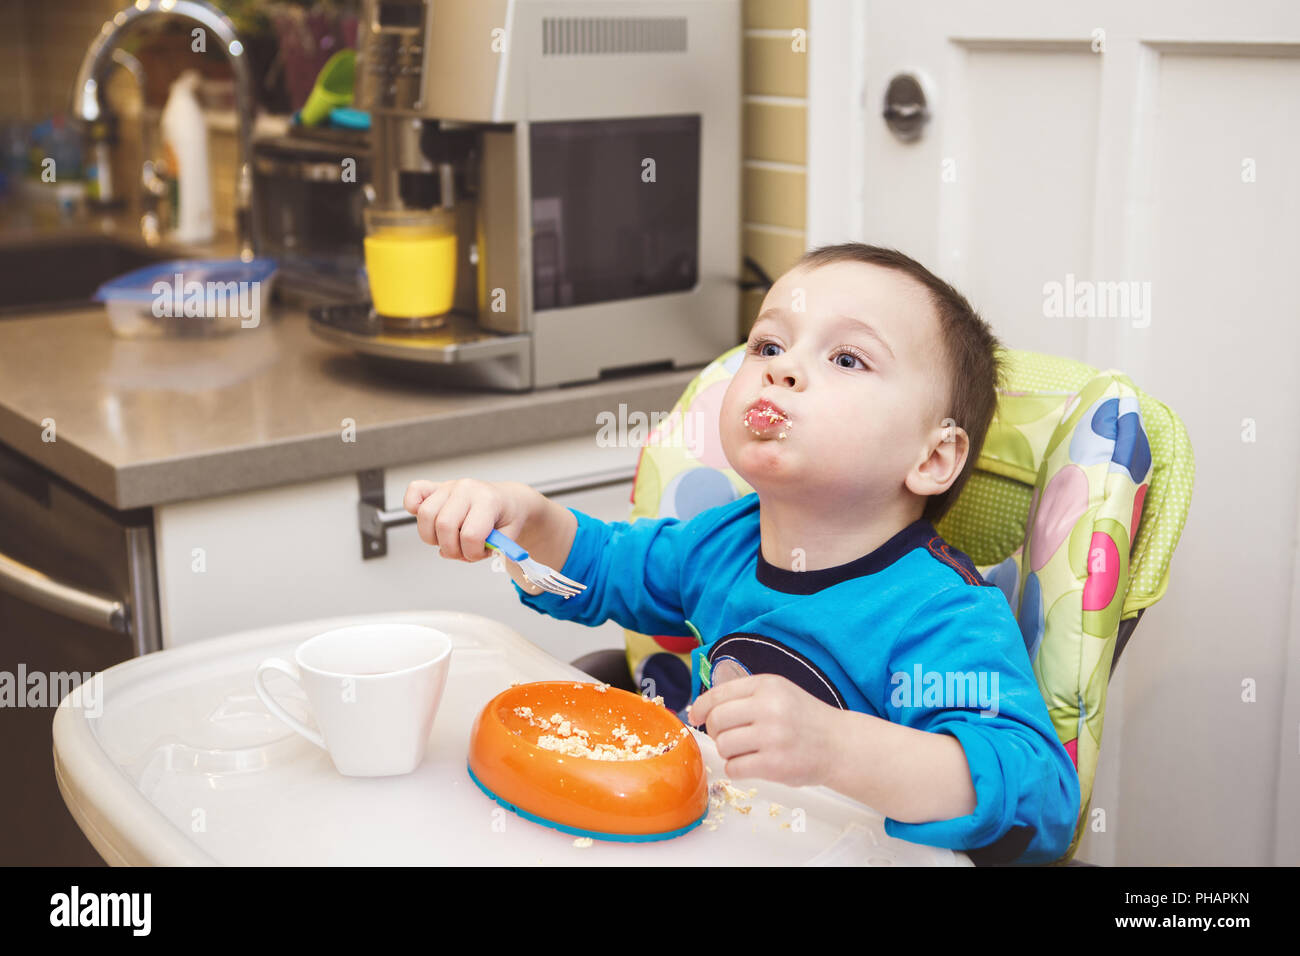 Portrait of cute adorable little toddler boy eating cottage cheese using fork, drinking orange juice, making funny face, sitting in high chair in kitc Stock Photo